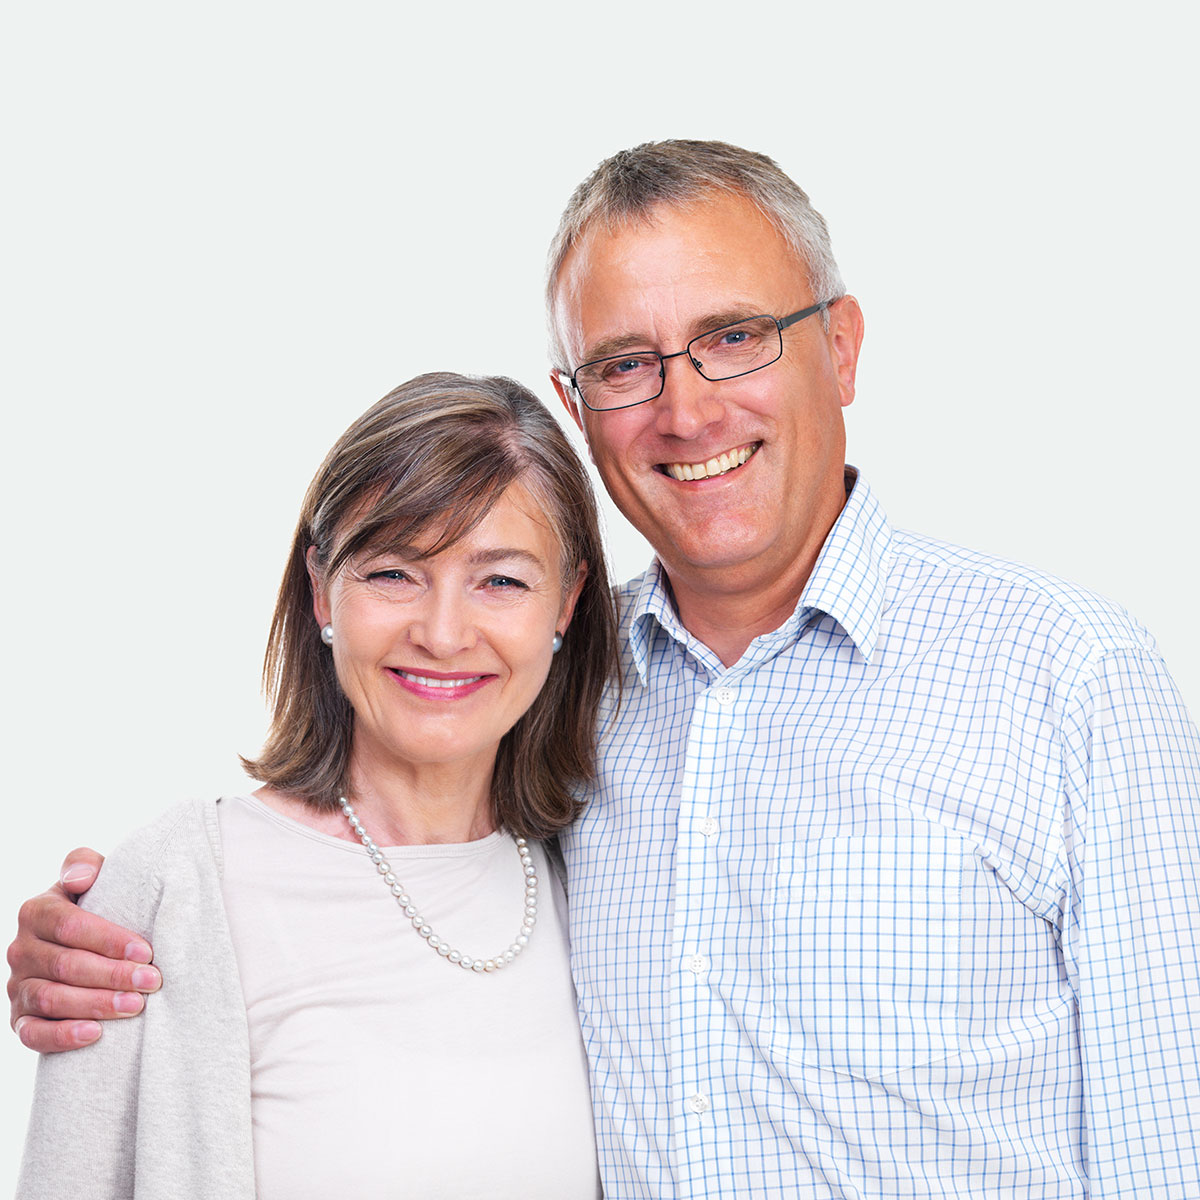 As Michael and Laura approached their mid-fifties and saw their three children all graduate from college, conversations about &quot;what's next&quot; came up more frequently. Over the span of their careers, years of hard work and dedication accumulated into a healthy nest egg.